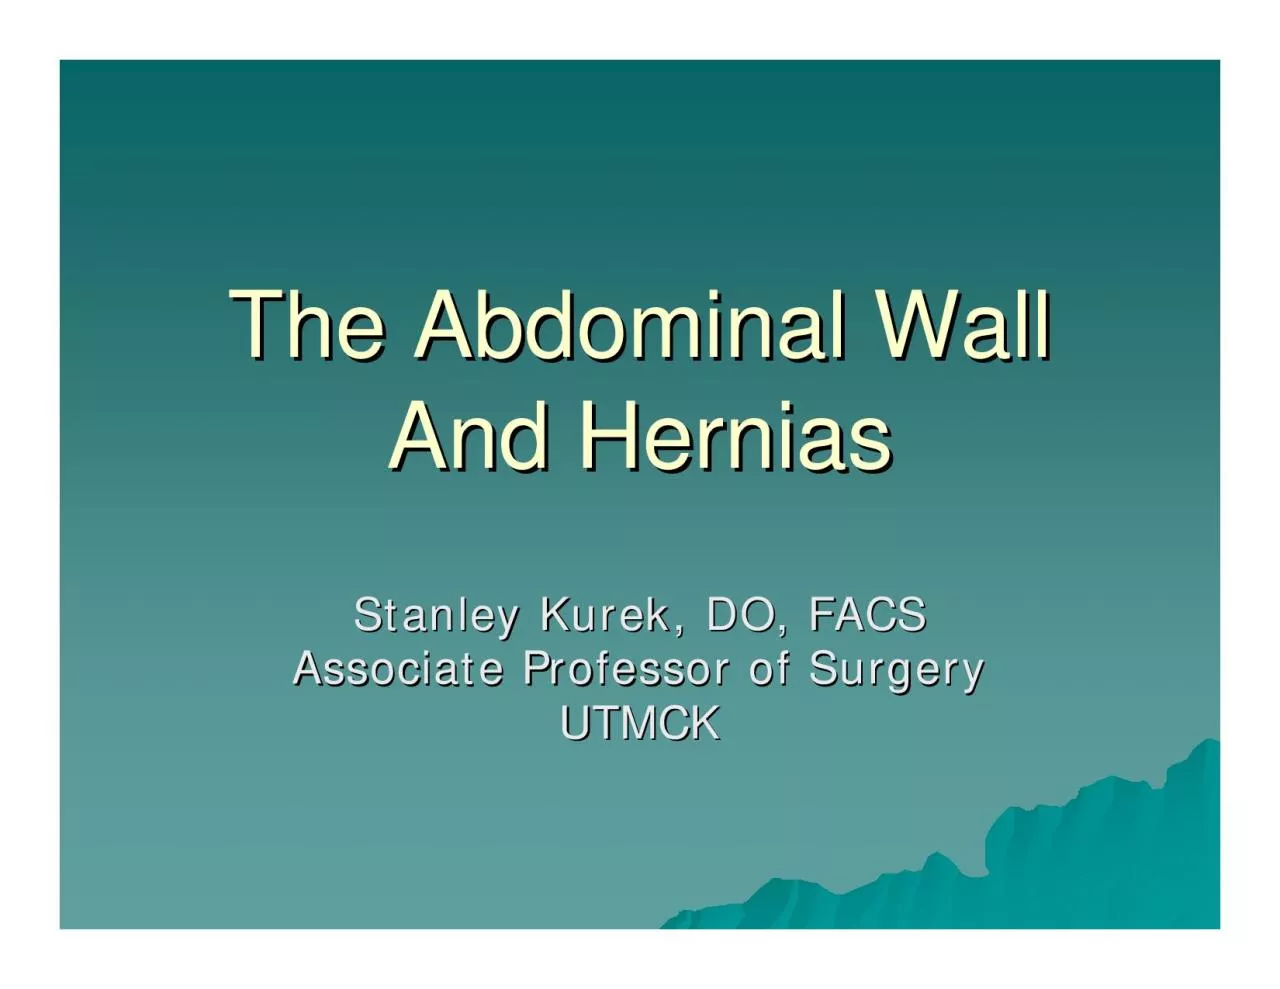 The Abdominal Wall